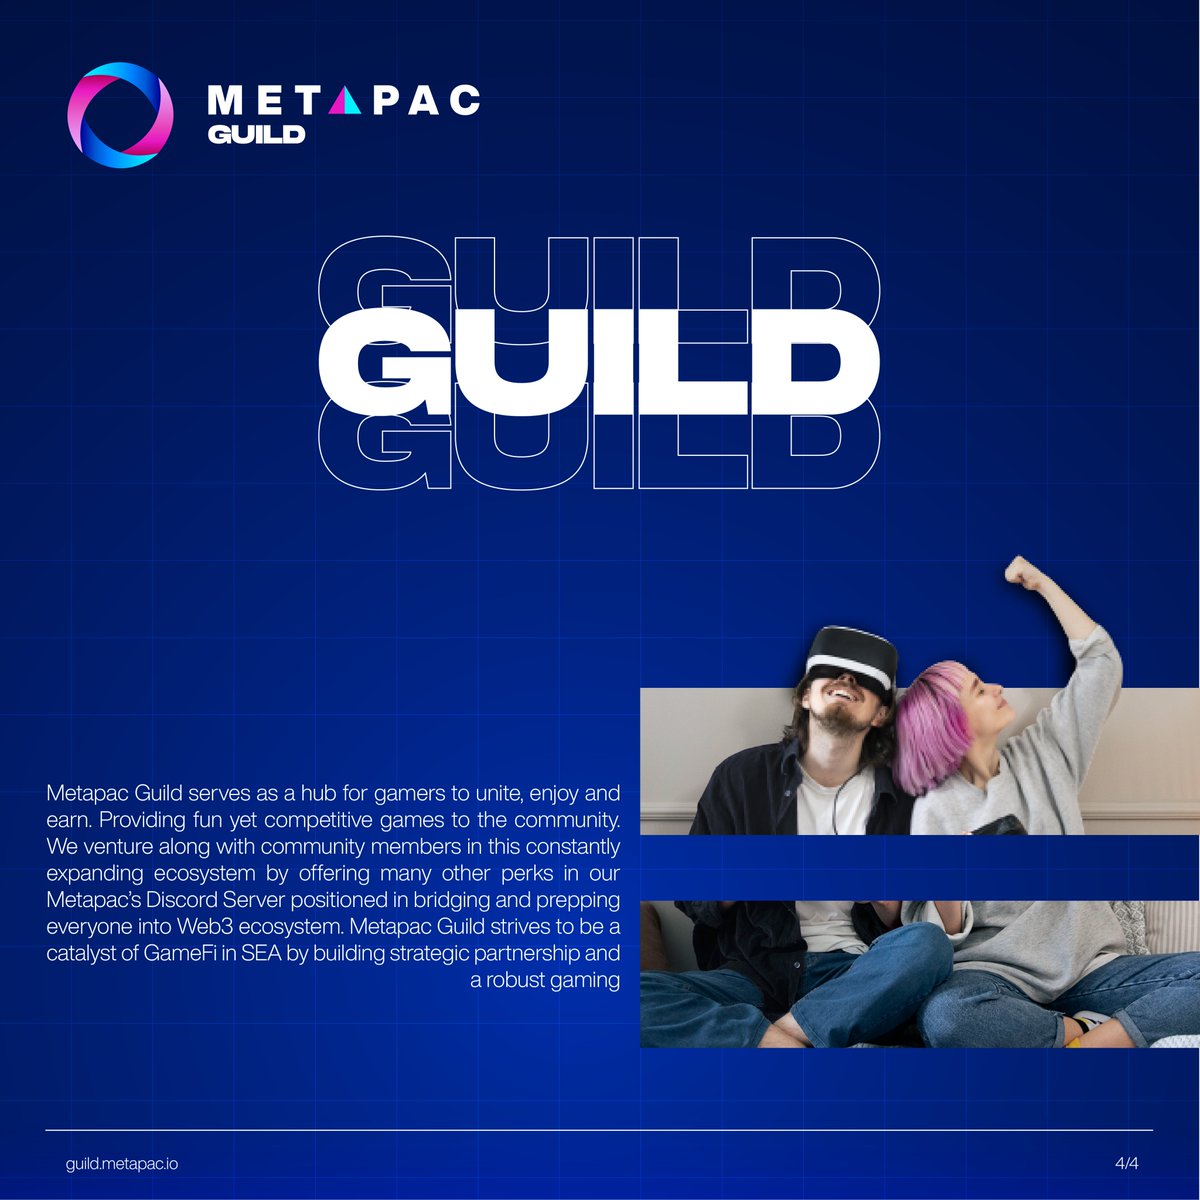 We're pleased to present our new brand - #metapacgroup⚡ which consists of Venture | Connect | Education | Guild

#imaginedifferent #rebranding #evolution #evolving #blockchain #web3 #metaverse #nft #guild #nftgames #education